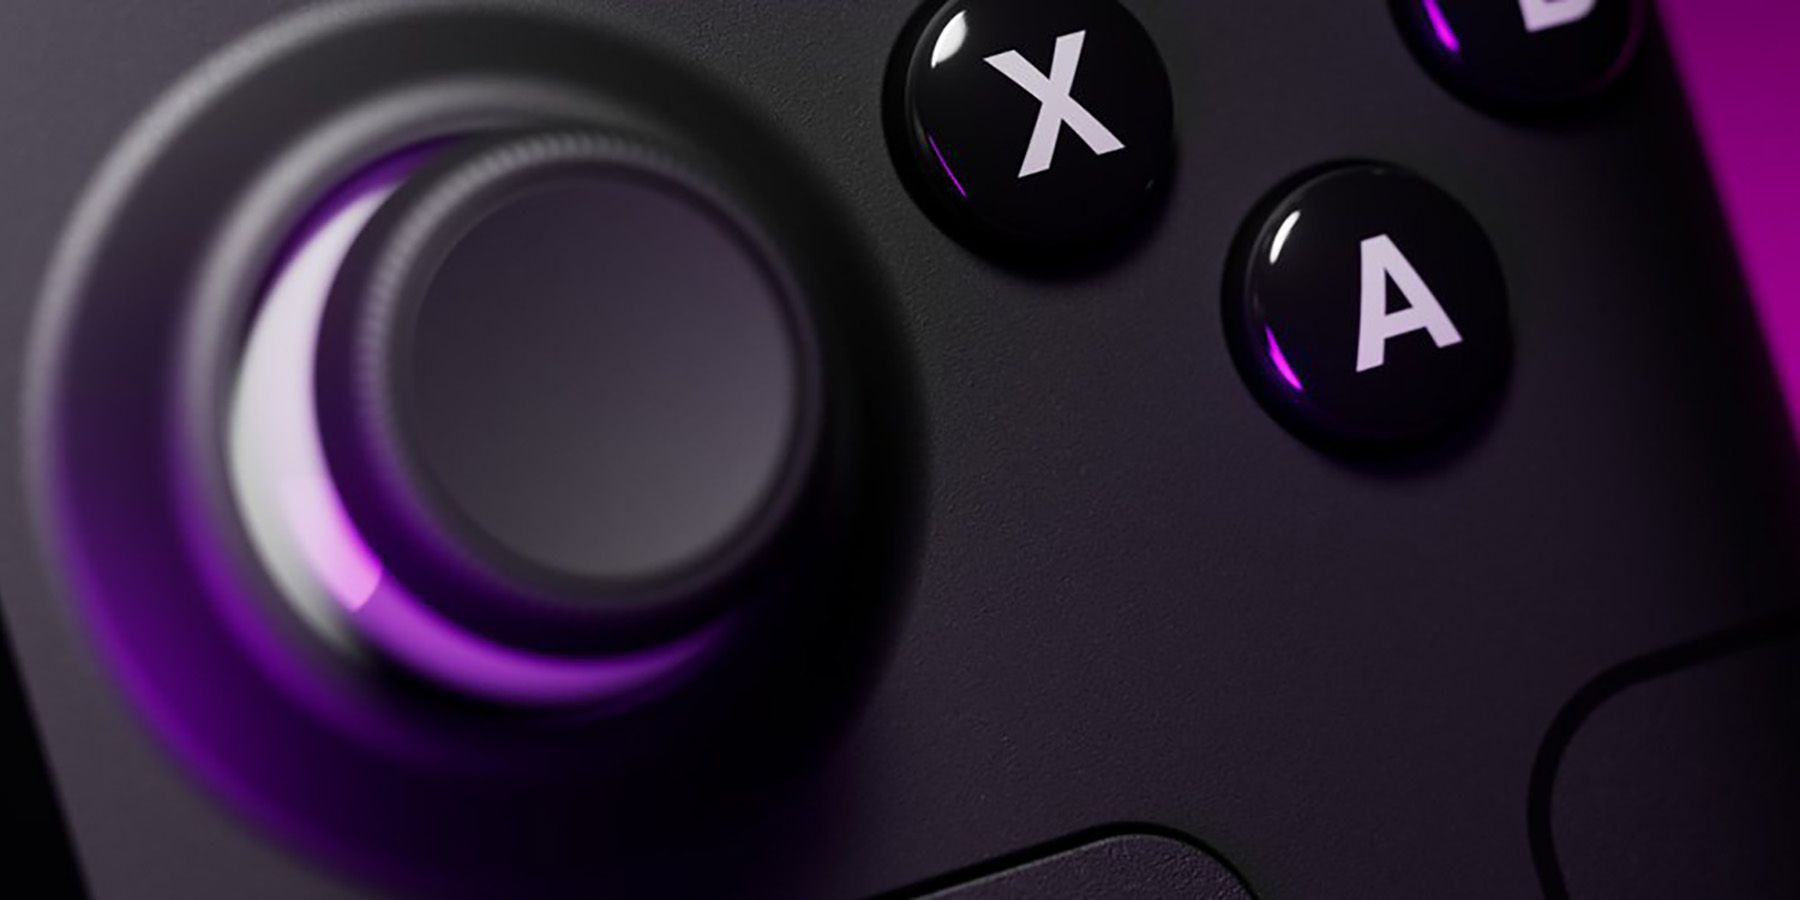 Close-up of the steam deck's face buttons and right analog stick